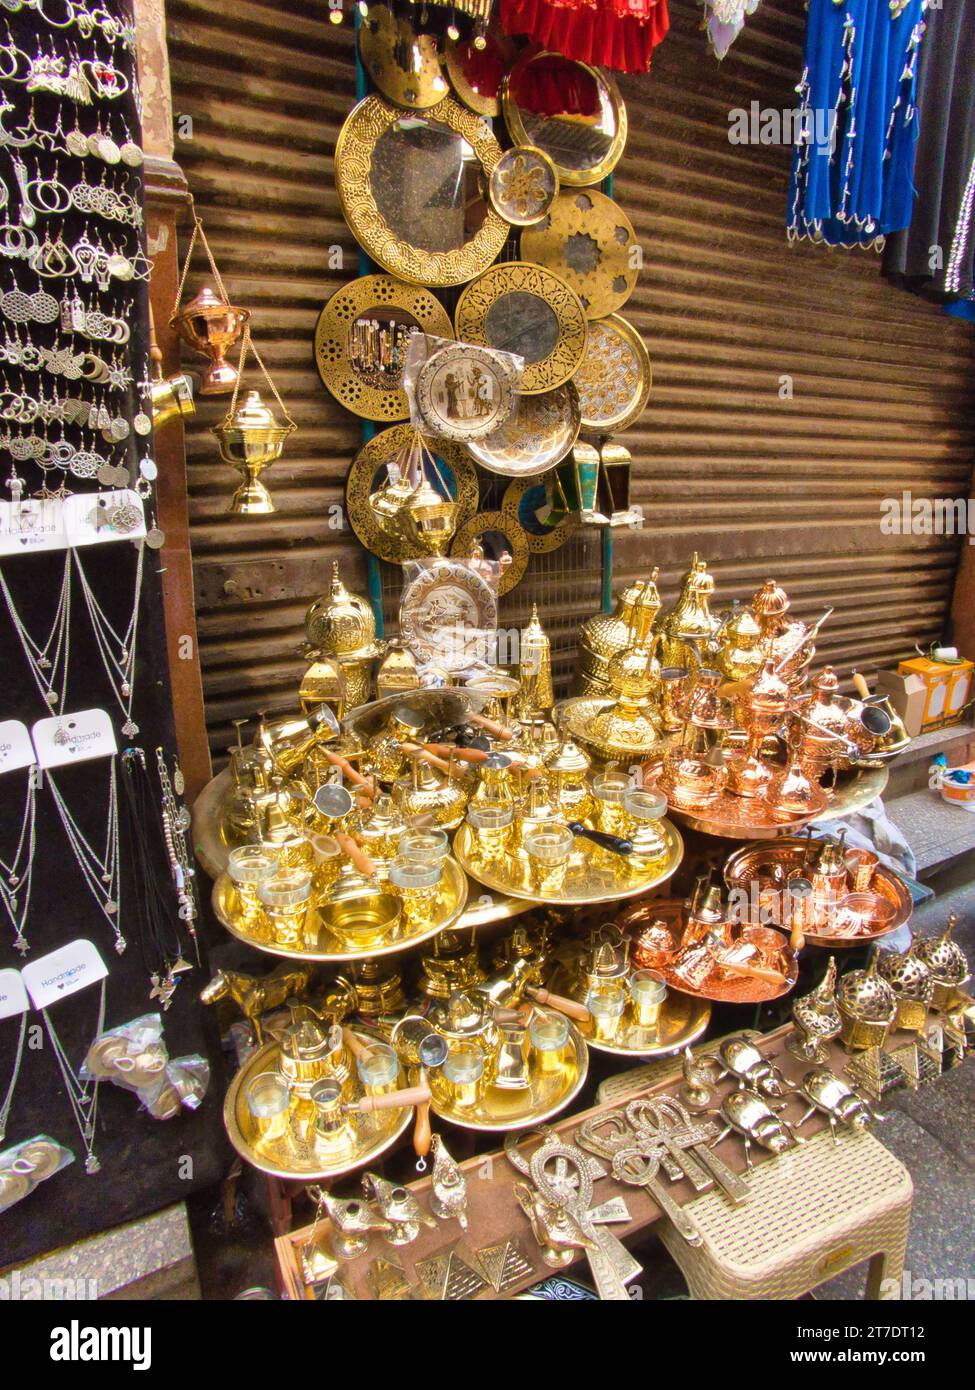 An interior shot of a retail store filled with a variety of golden objects and merchandise Stock Photo